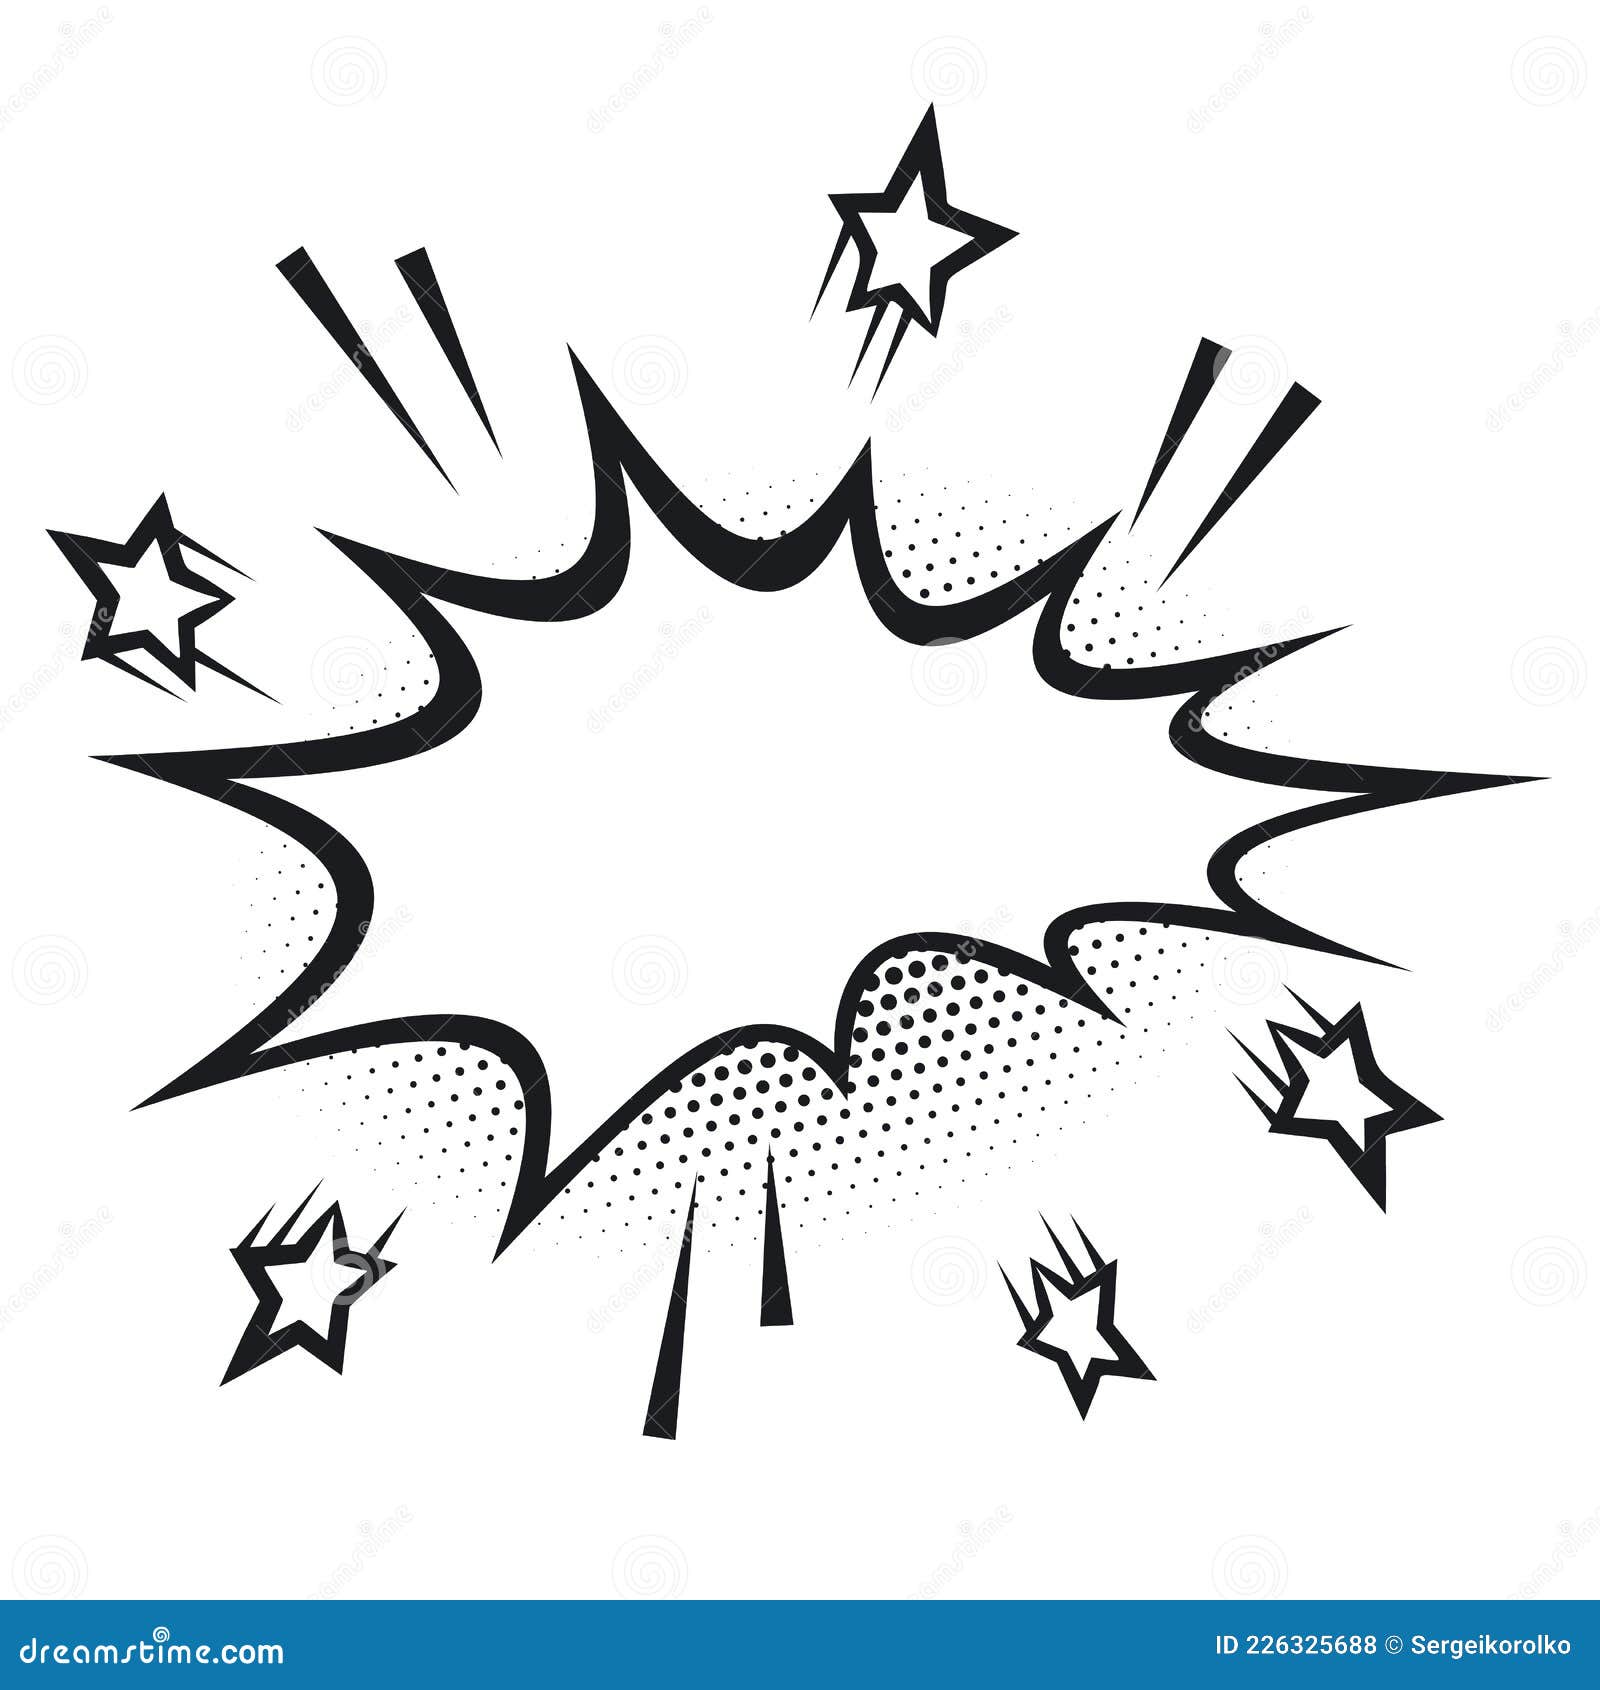 Cartoon Explosion or Speech Bubble in Comic Style with Space for Your Text  Stock Vector - Illustration of cartoon, background: 226325688